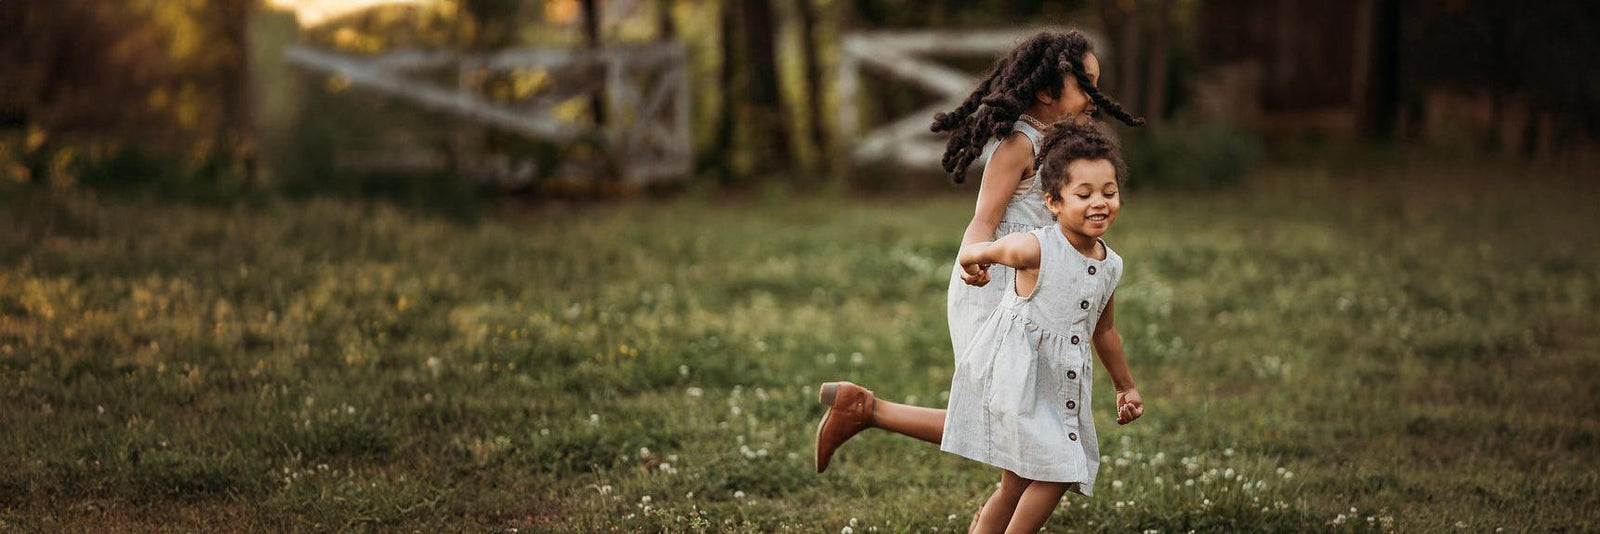 Two sisters holding hands while running through the yard